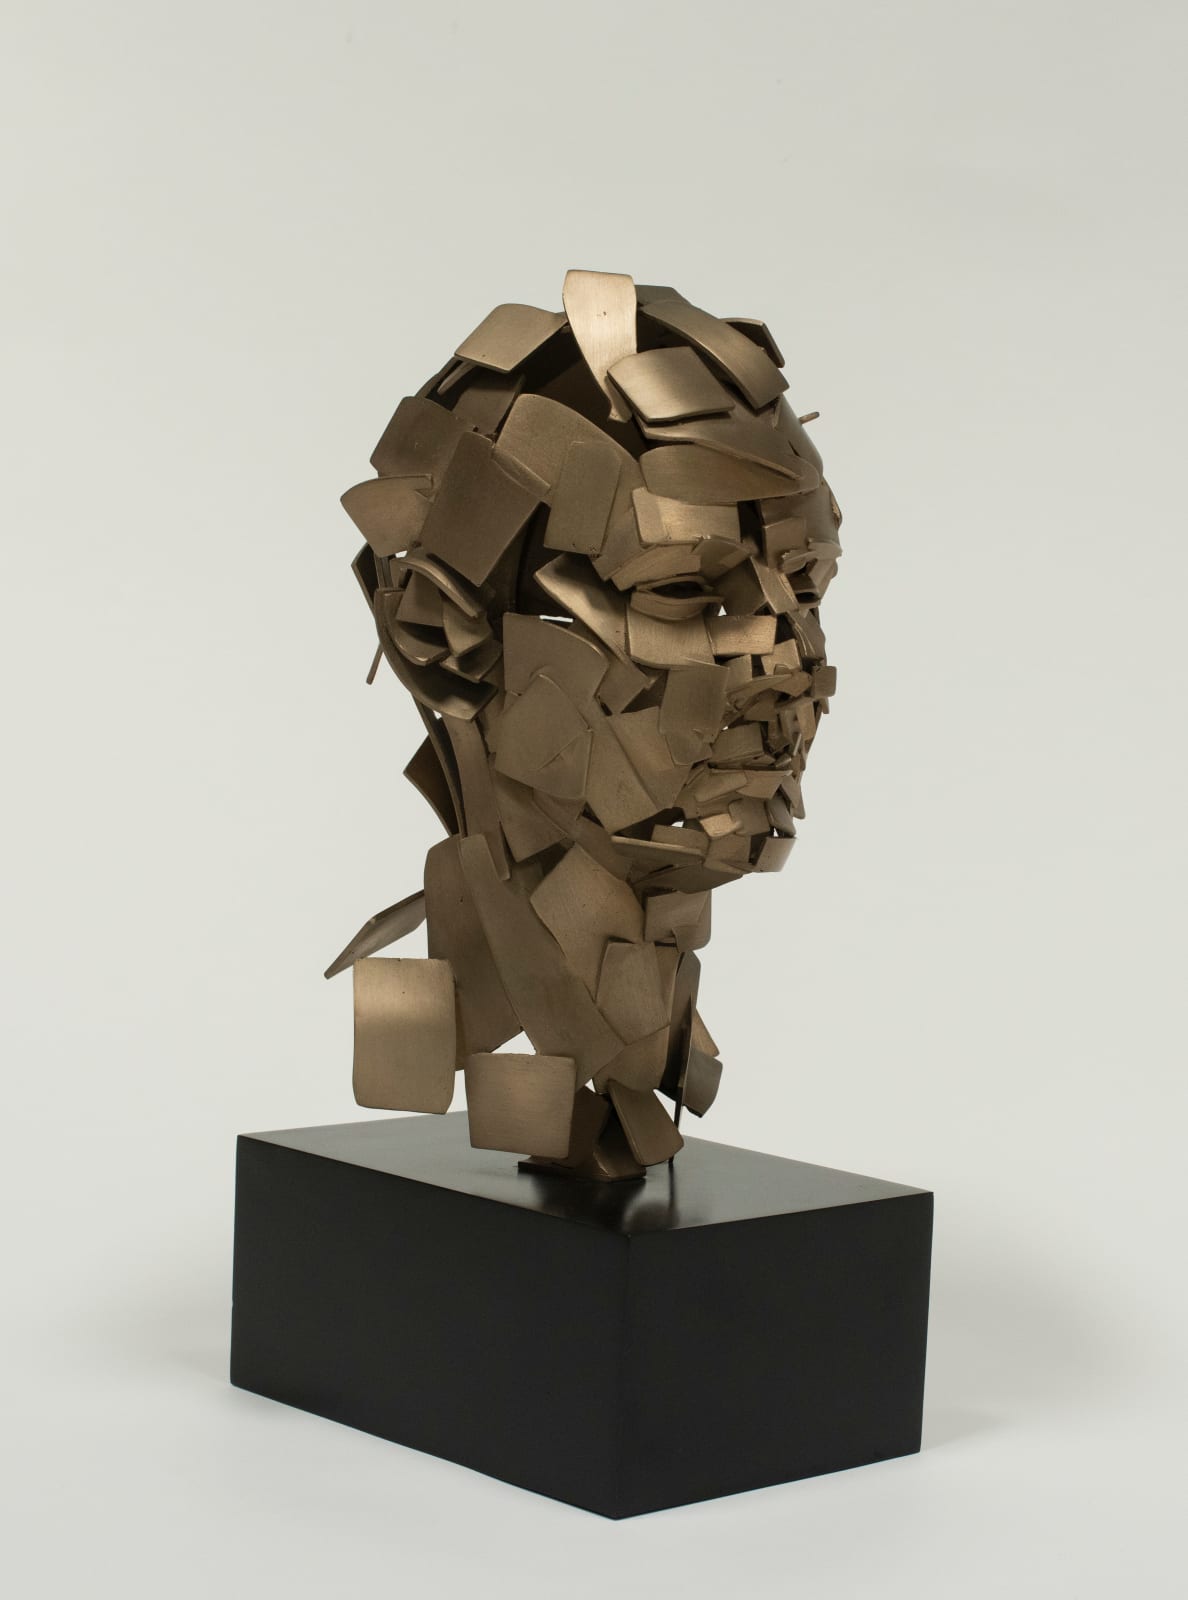 Jonathan Yeo, Maquette for Homage to Paolozzi (Self-Portrait), 2017